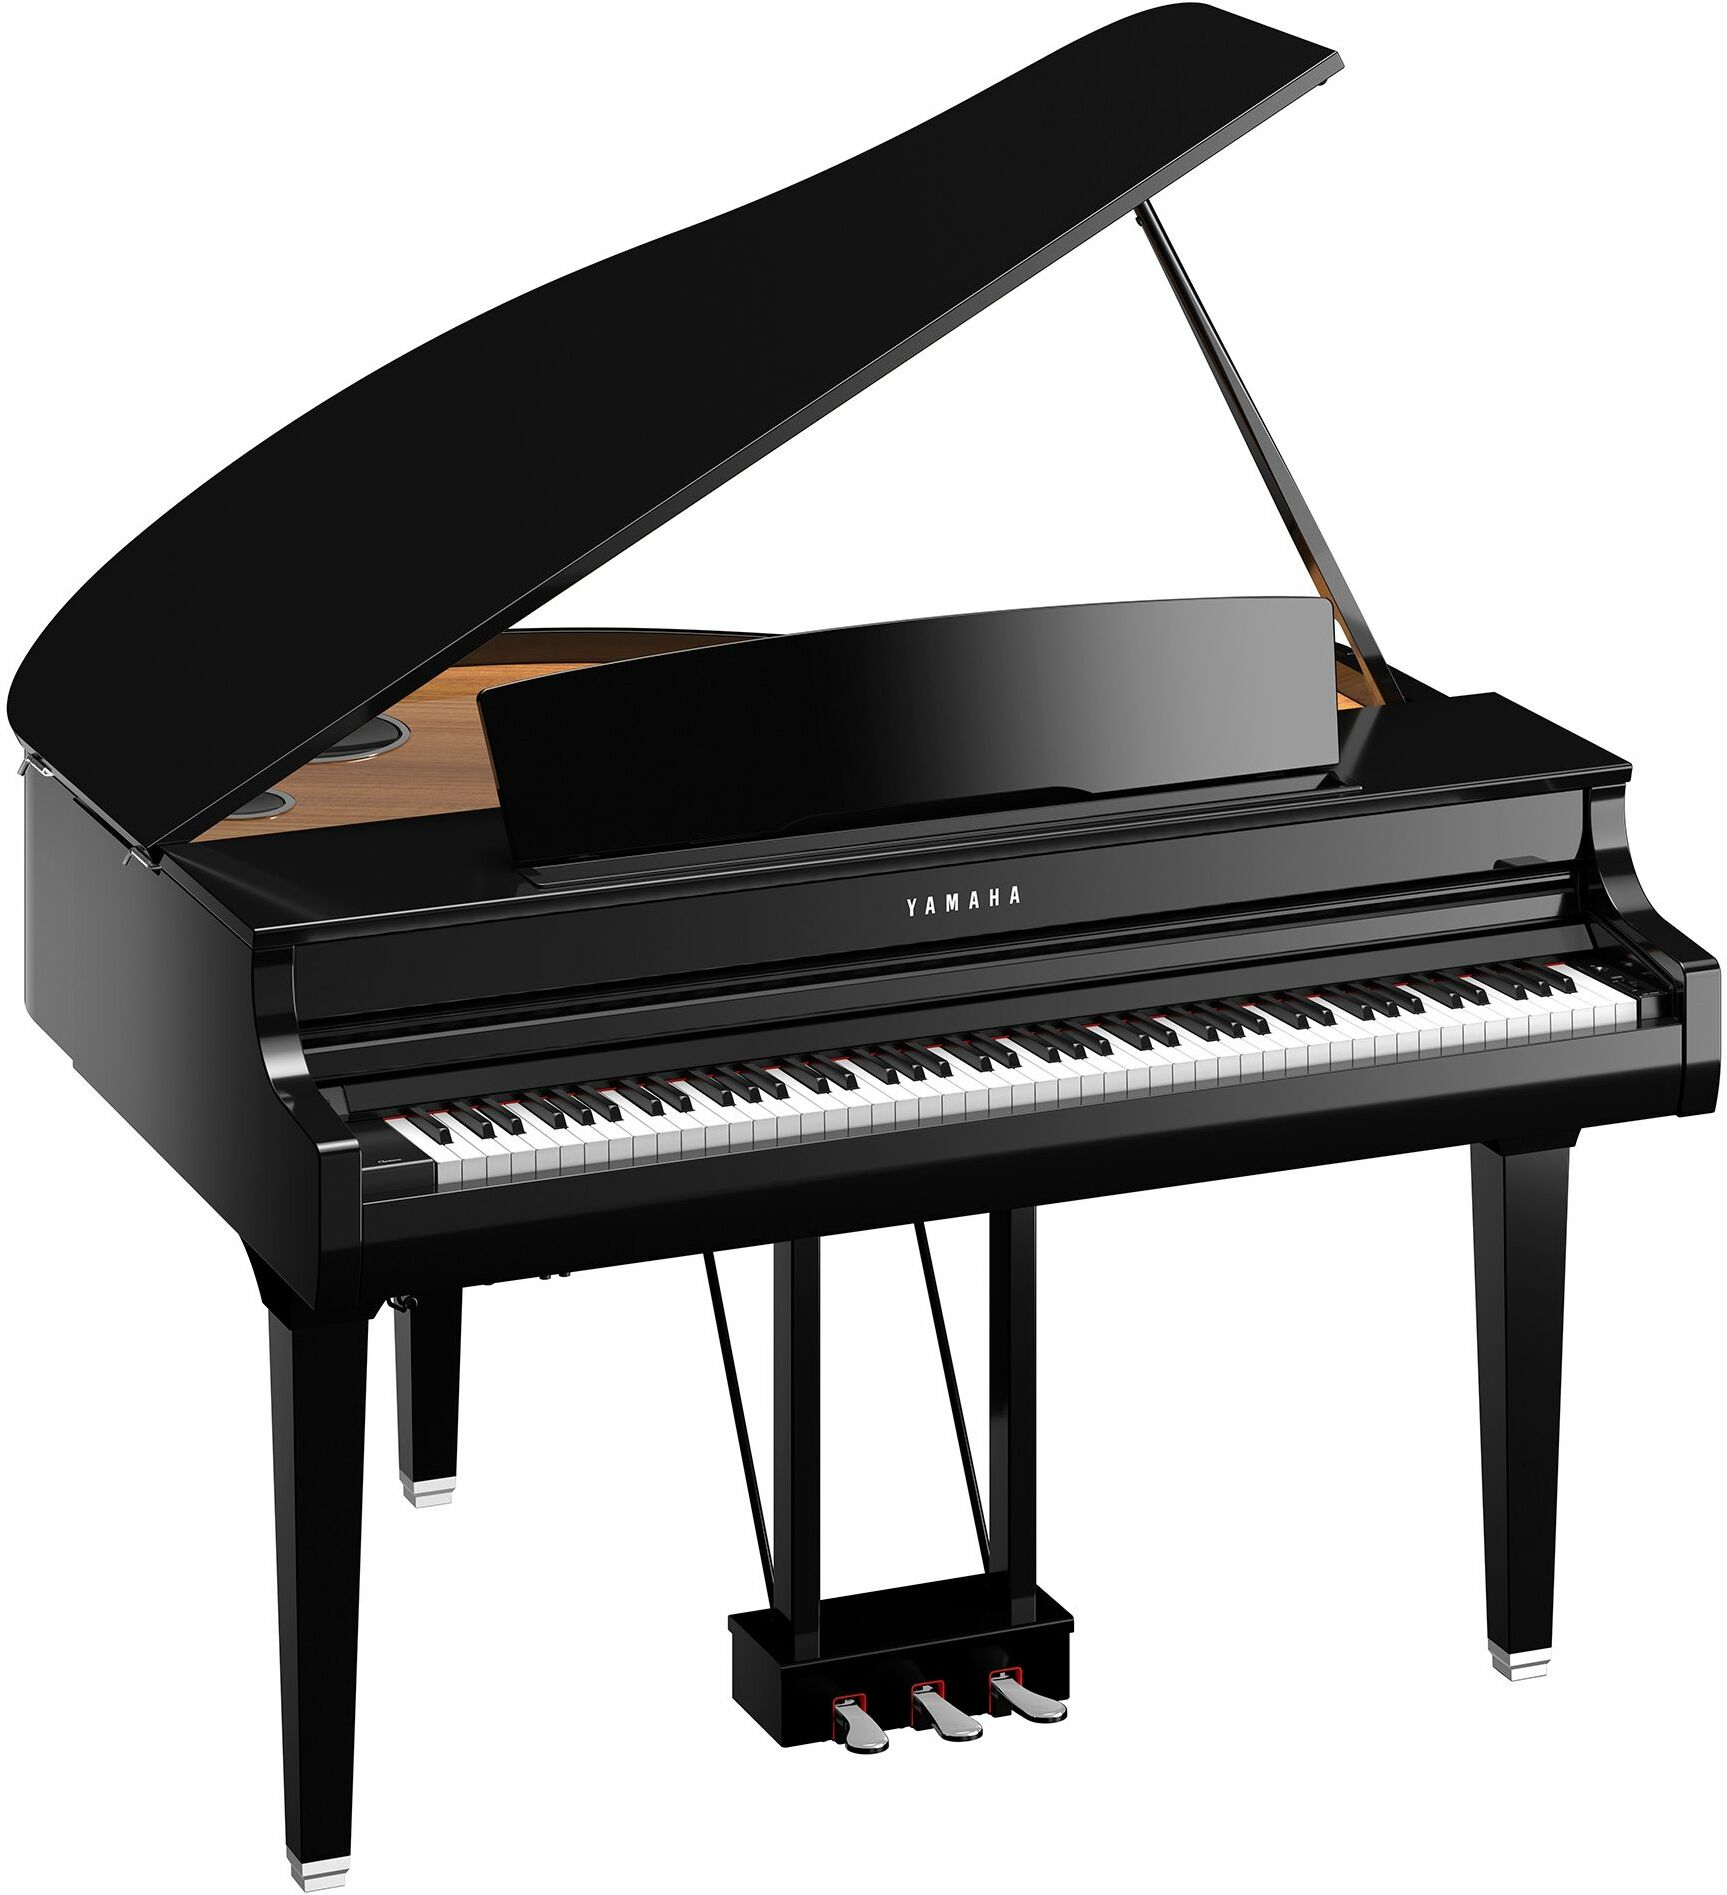 Yamaha Csp-295 Gp - Digital piano with stand - Main picture